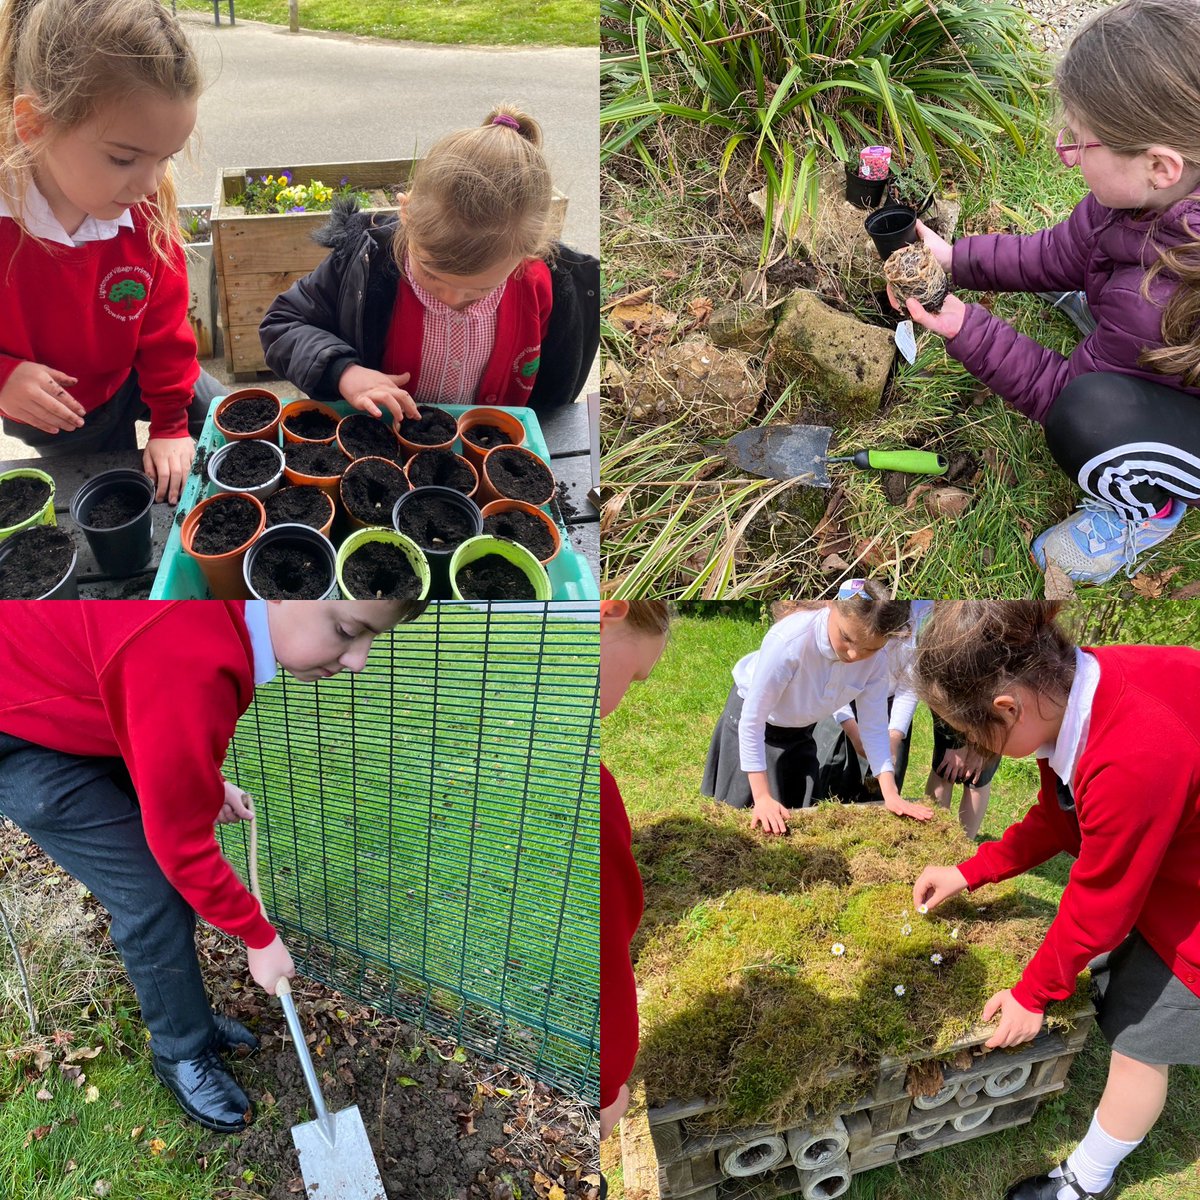 Not all classrooms have four walls @LightmoorPri gardening and the great outdoors is wonderful for teambuilding and having conversations as well as building friendships #mentalwellbeing